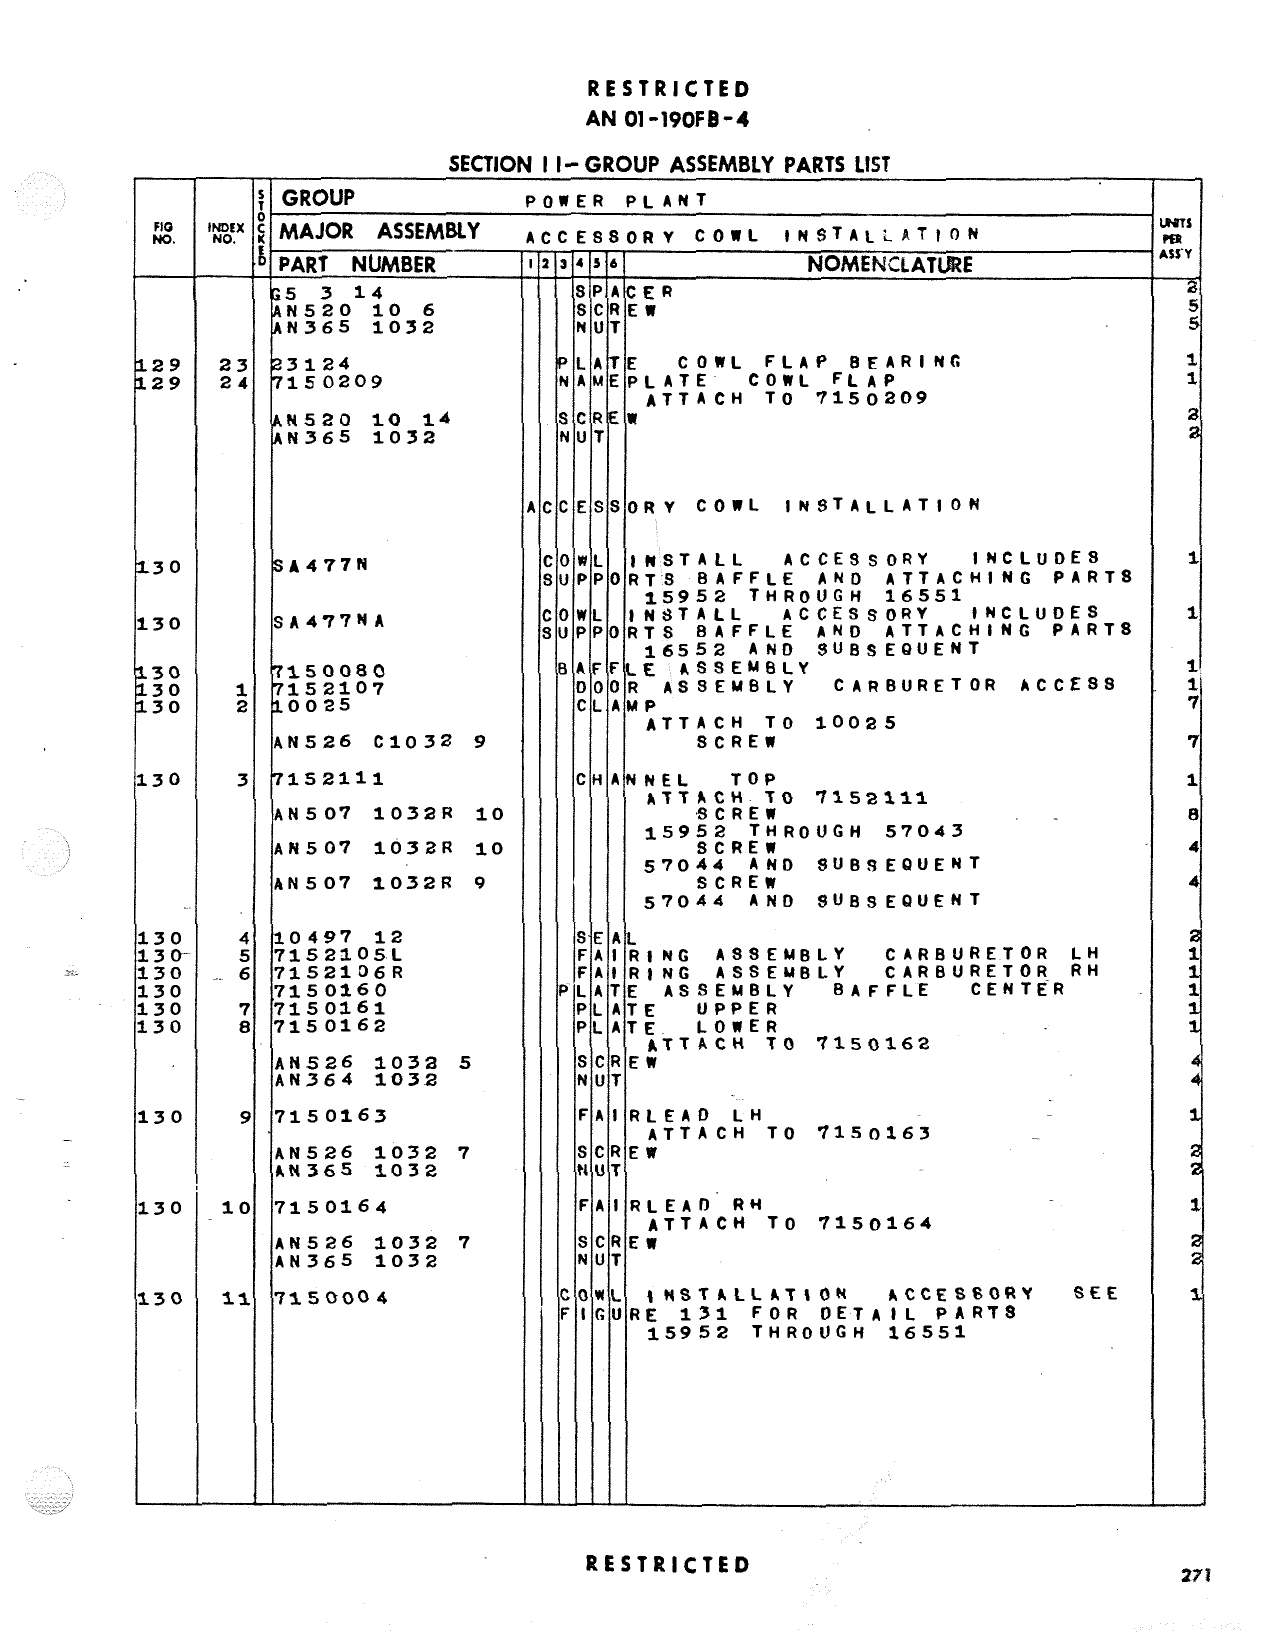 Sample page 277 from AirCorps Library document: Parts Catalog - FM-2